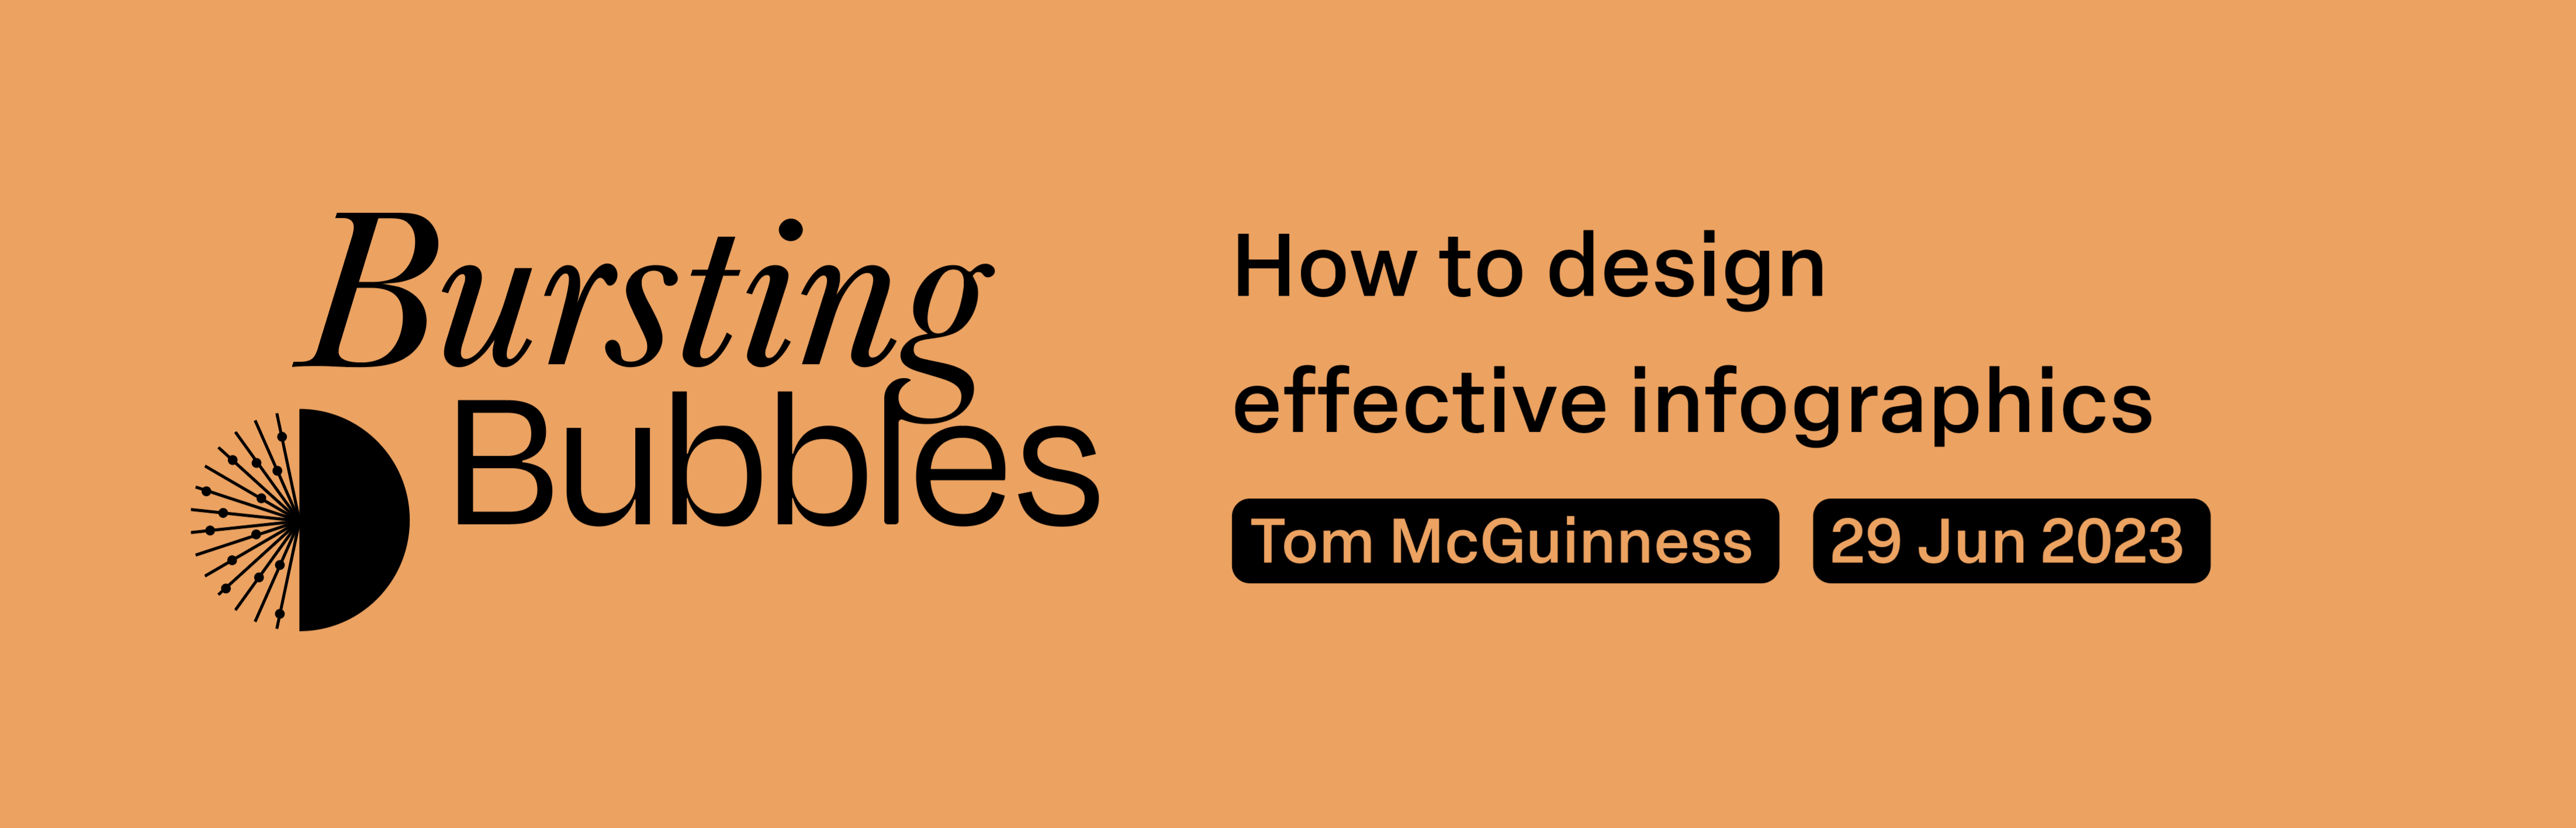 How to create effective infographics, with Tom McGuinness